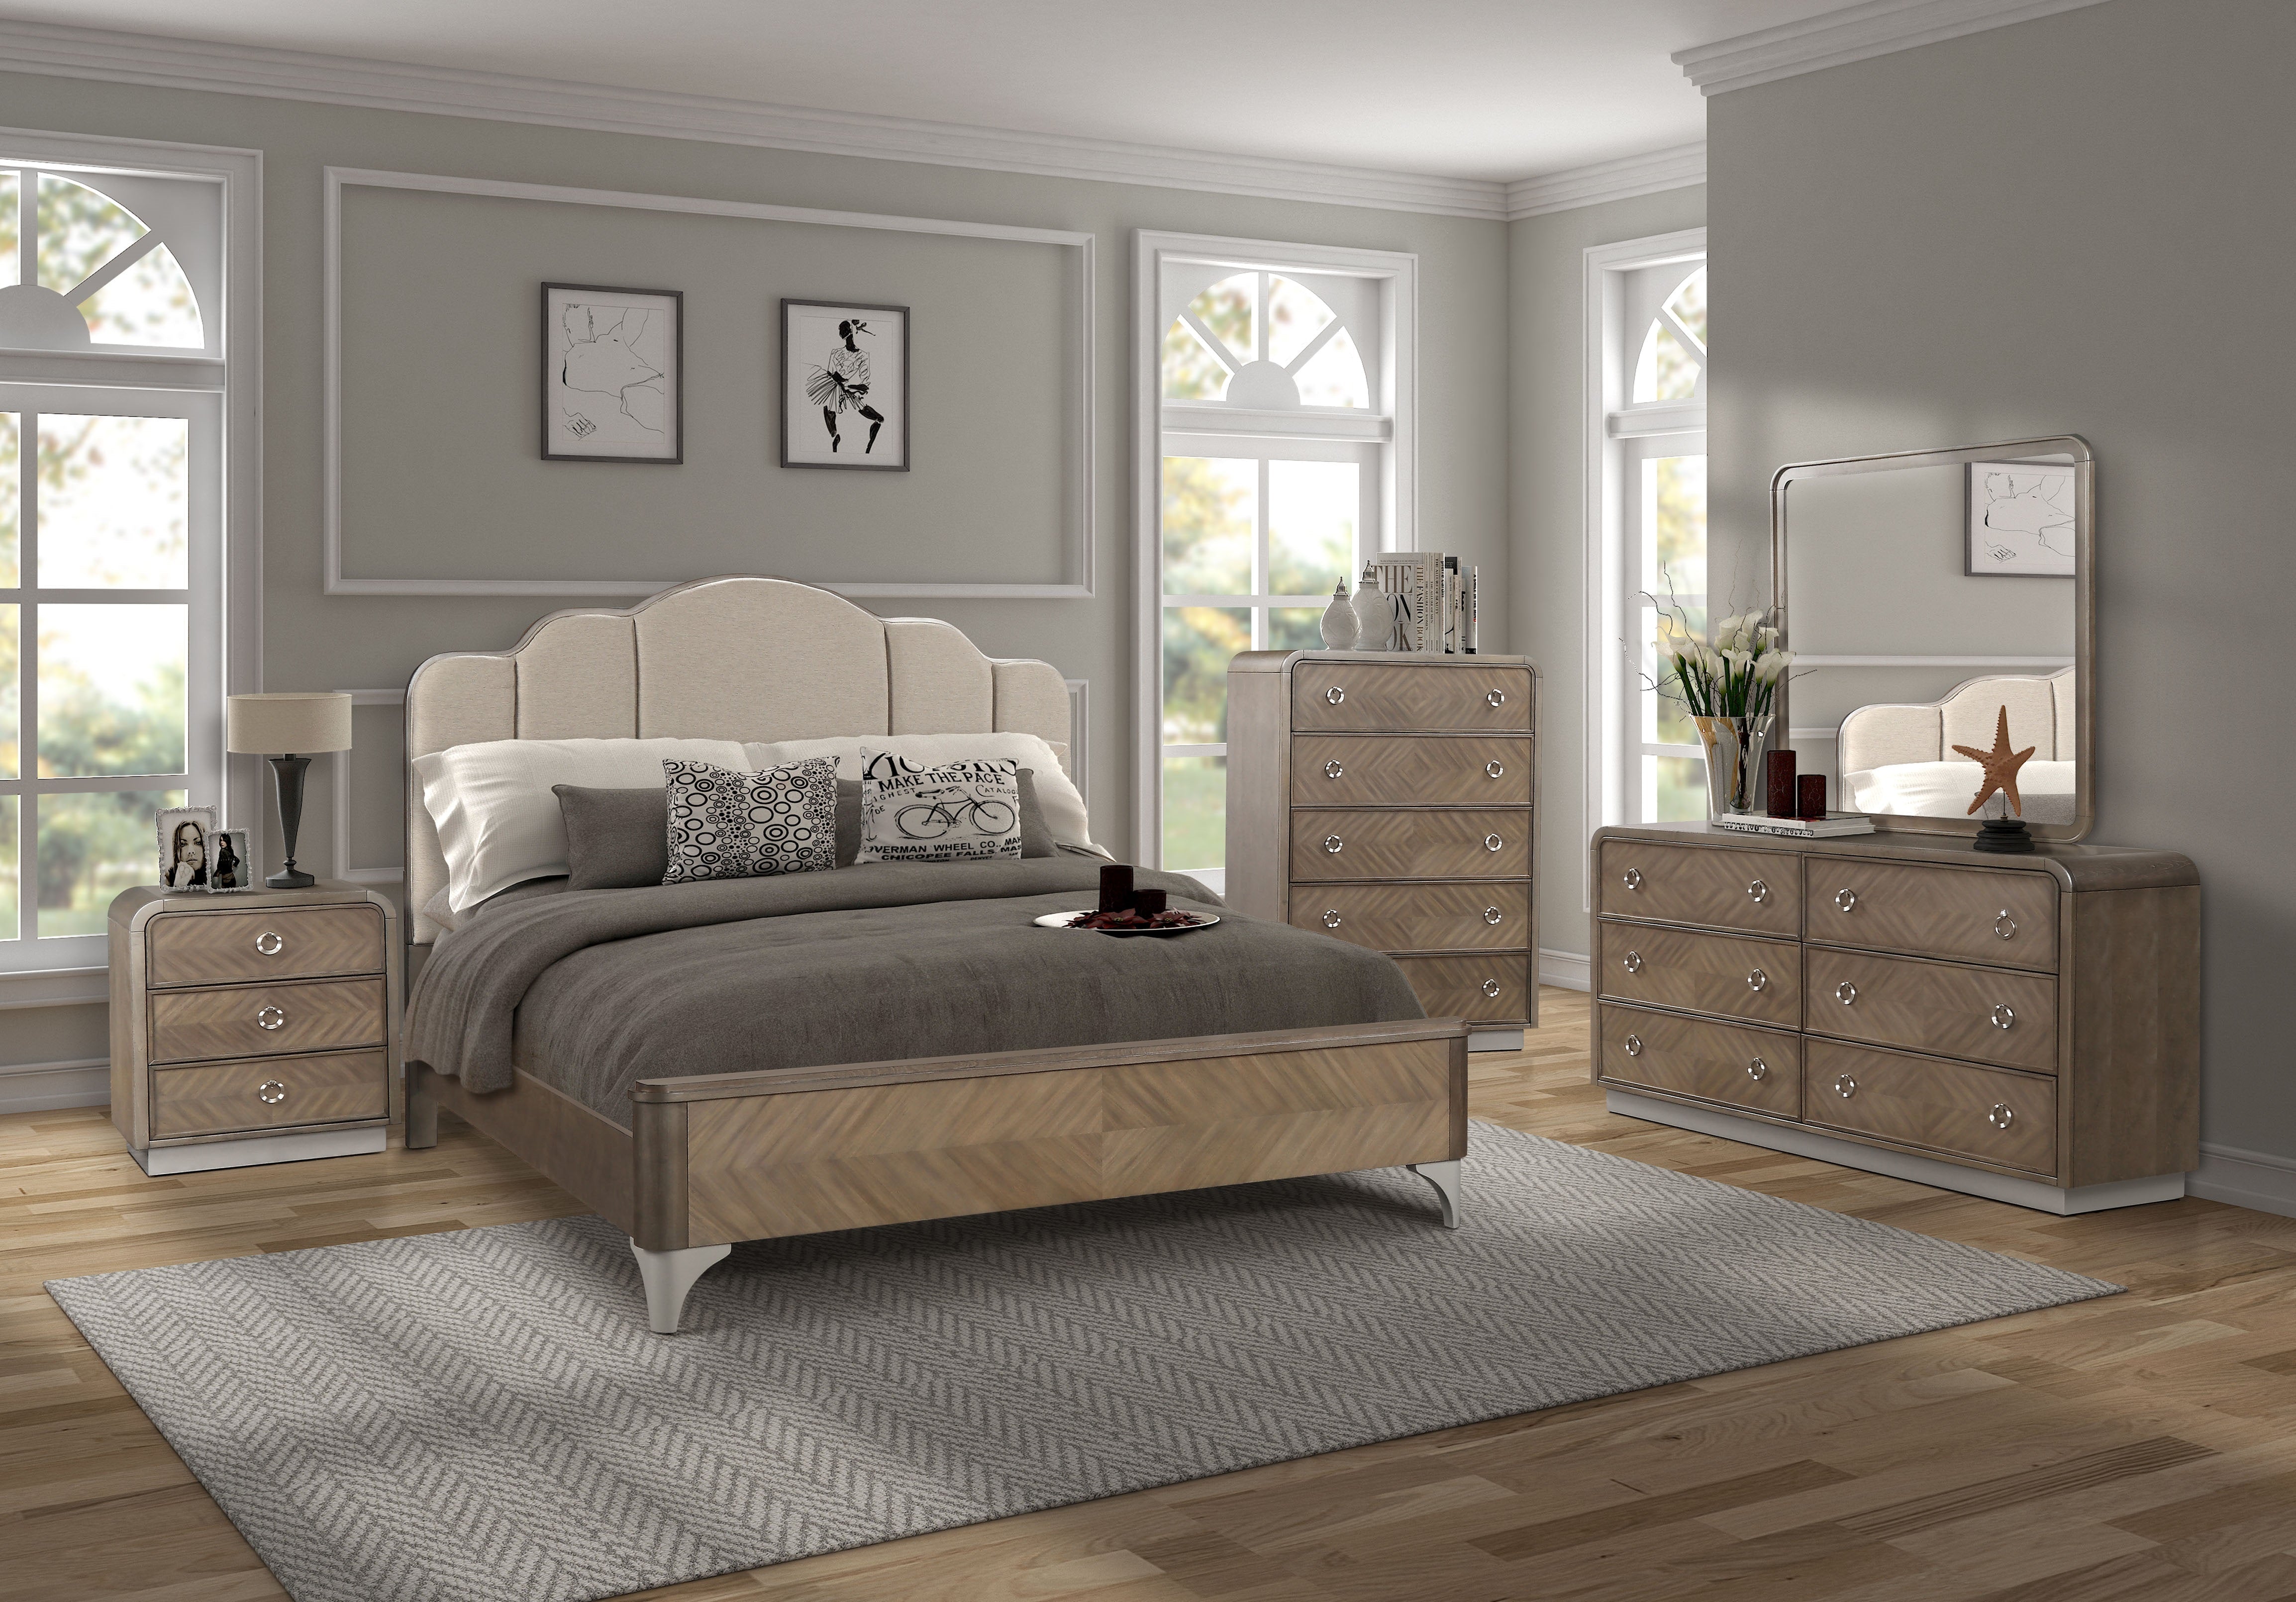 Oasis Home Cascade Upholstered Bed Queen Size